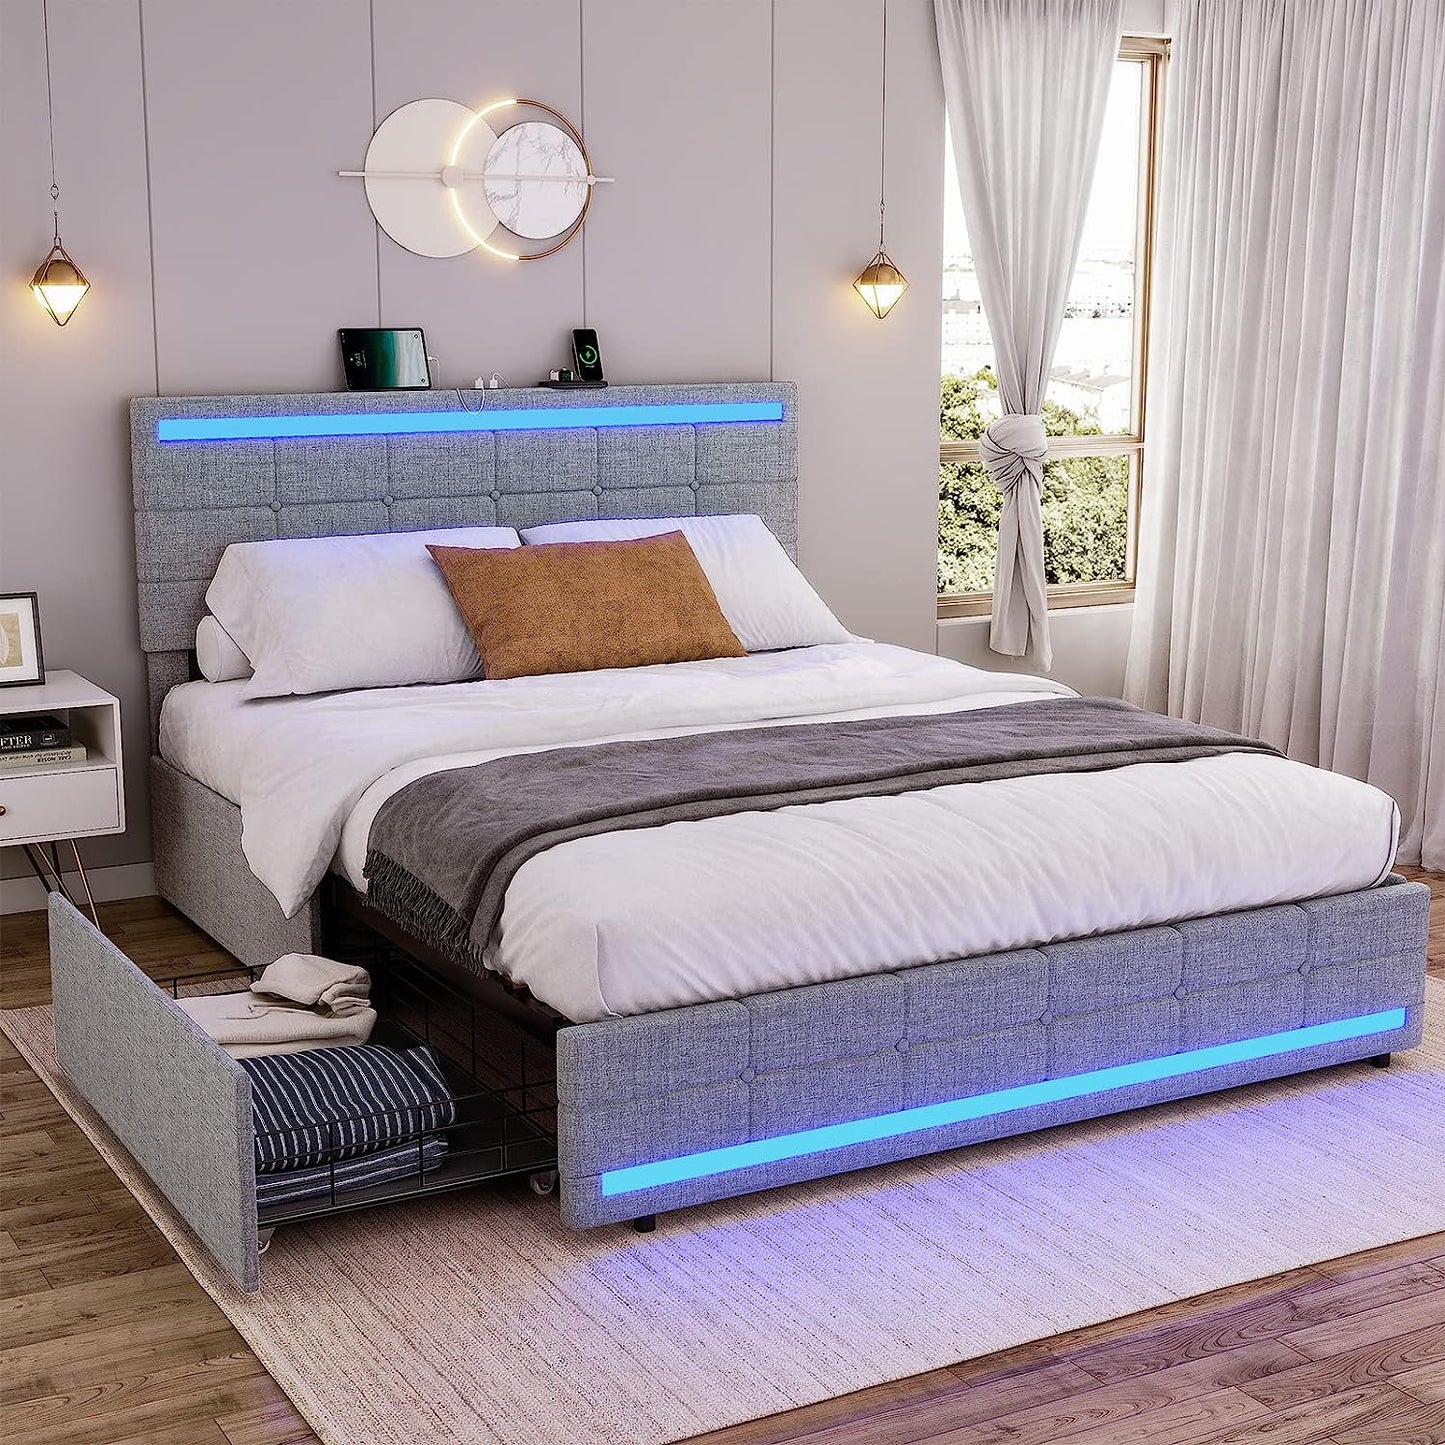 BEAUTIFUL ADORNEVE Queen Bed Frame with LED Lights Headboard Footboard, Platform Bed Frame with 4 Drawers and 2 USB Charging Station, LED Bed Frame with Storage, No Box Spring Needed, Light Grey